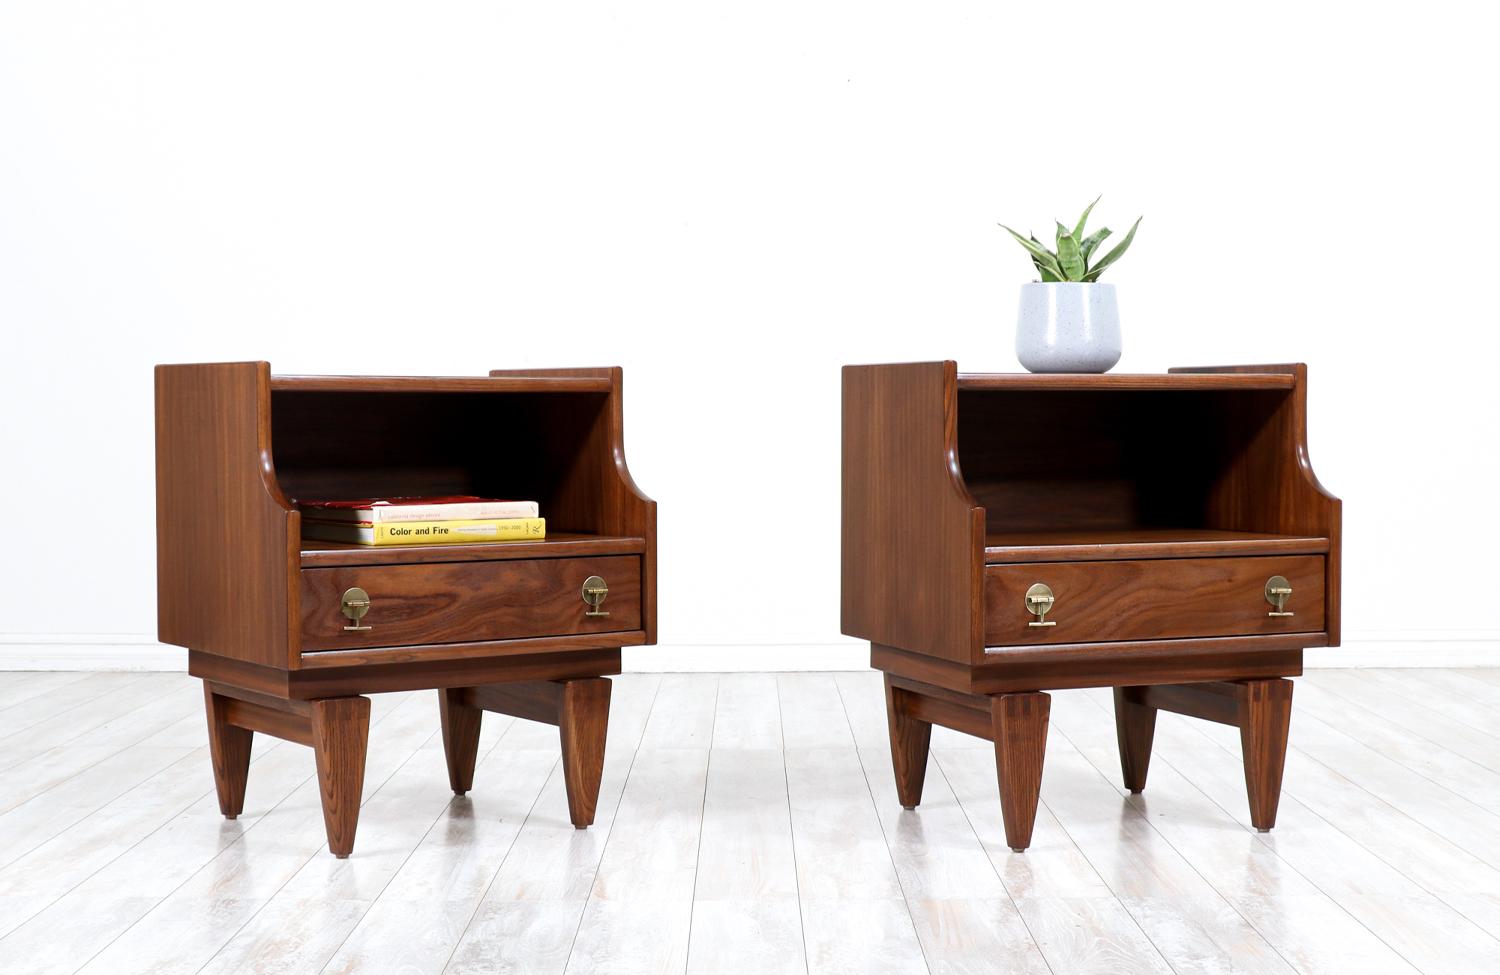 Mid-Century Modern sculpted night stands by Stanley Furniture.

________________________________________

Transforming a piece of Mid-Century Modern furniture is like bringing history back to life, and we take this journey with passion and